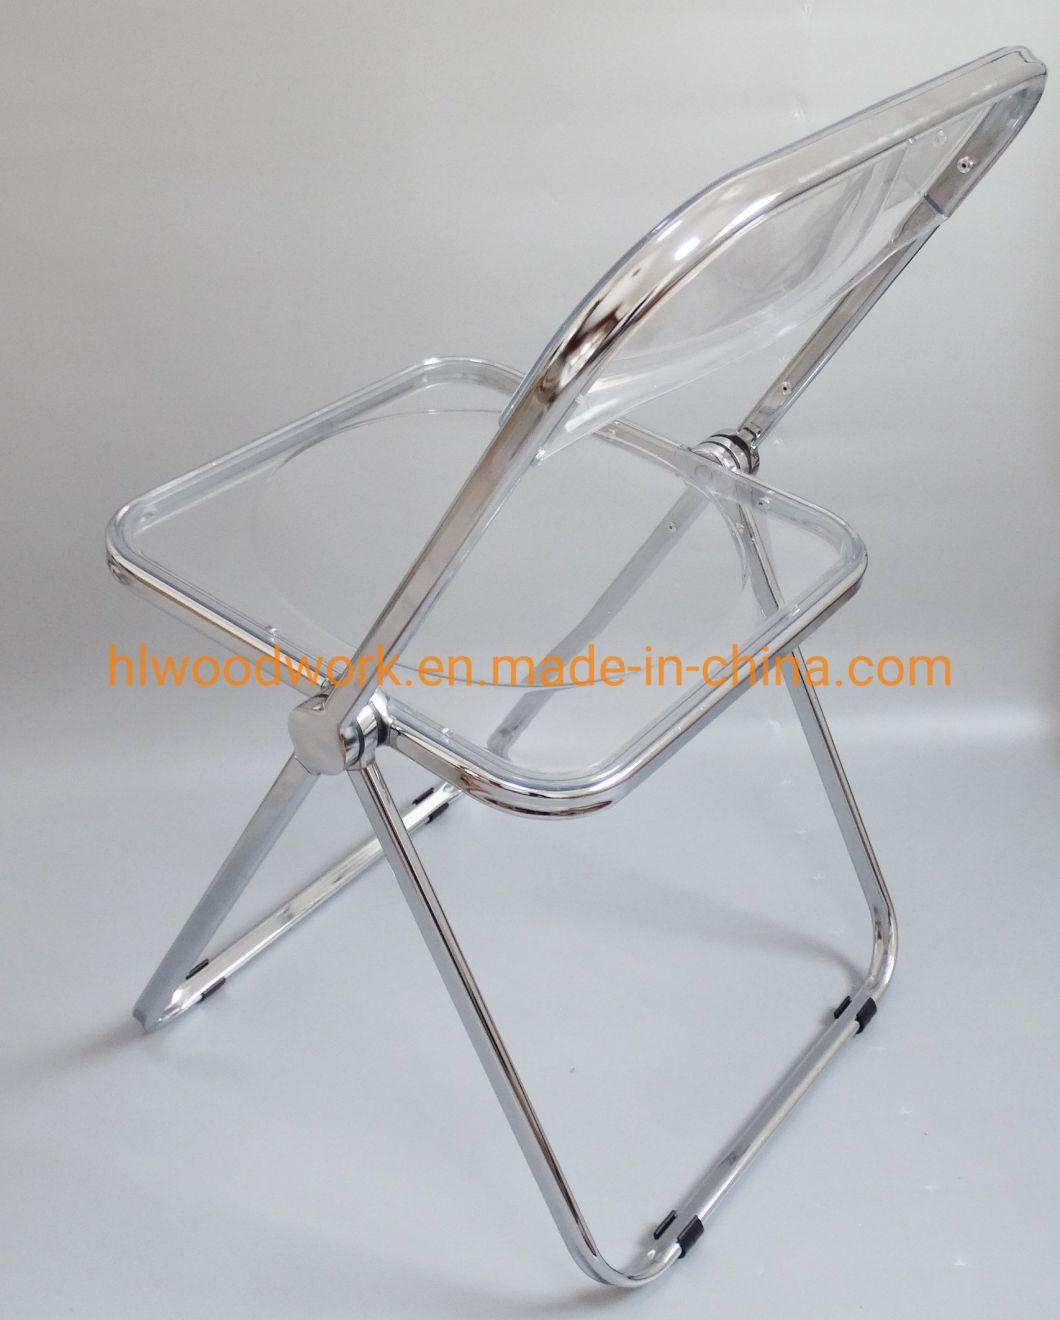 Modern Transparent Brown Folding Chair PC Plastic Living Room Chair Chrome Frame Office Bar Dining Leisure Banquet Wedding Meeting Chair Plastic Dining Chair